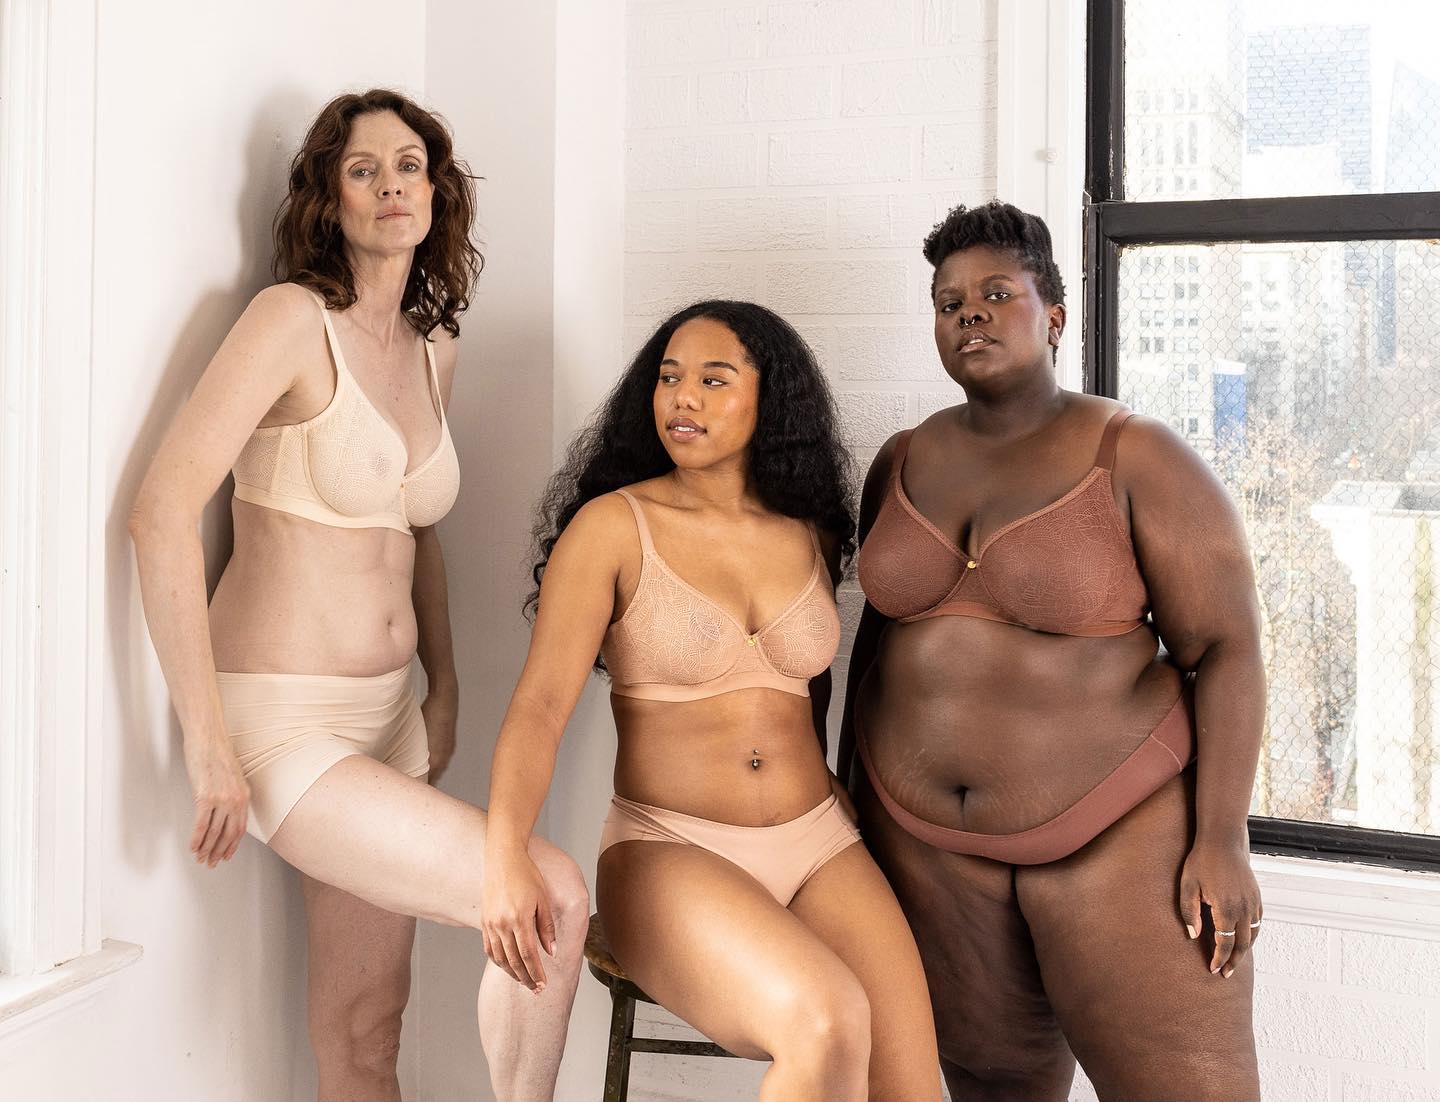 Inclusive bra sizing: Small business searches for fit models